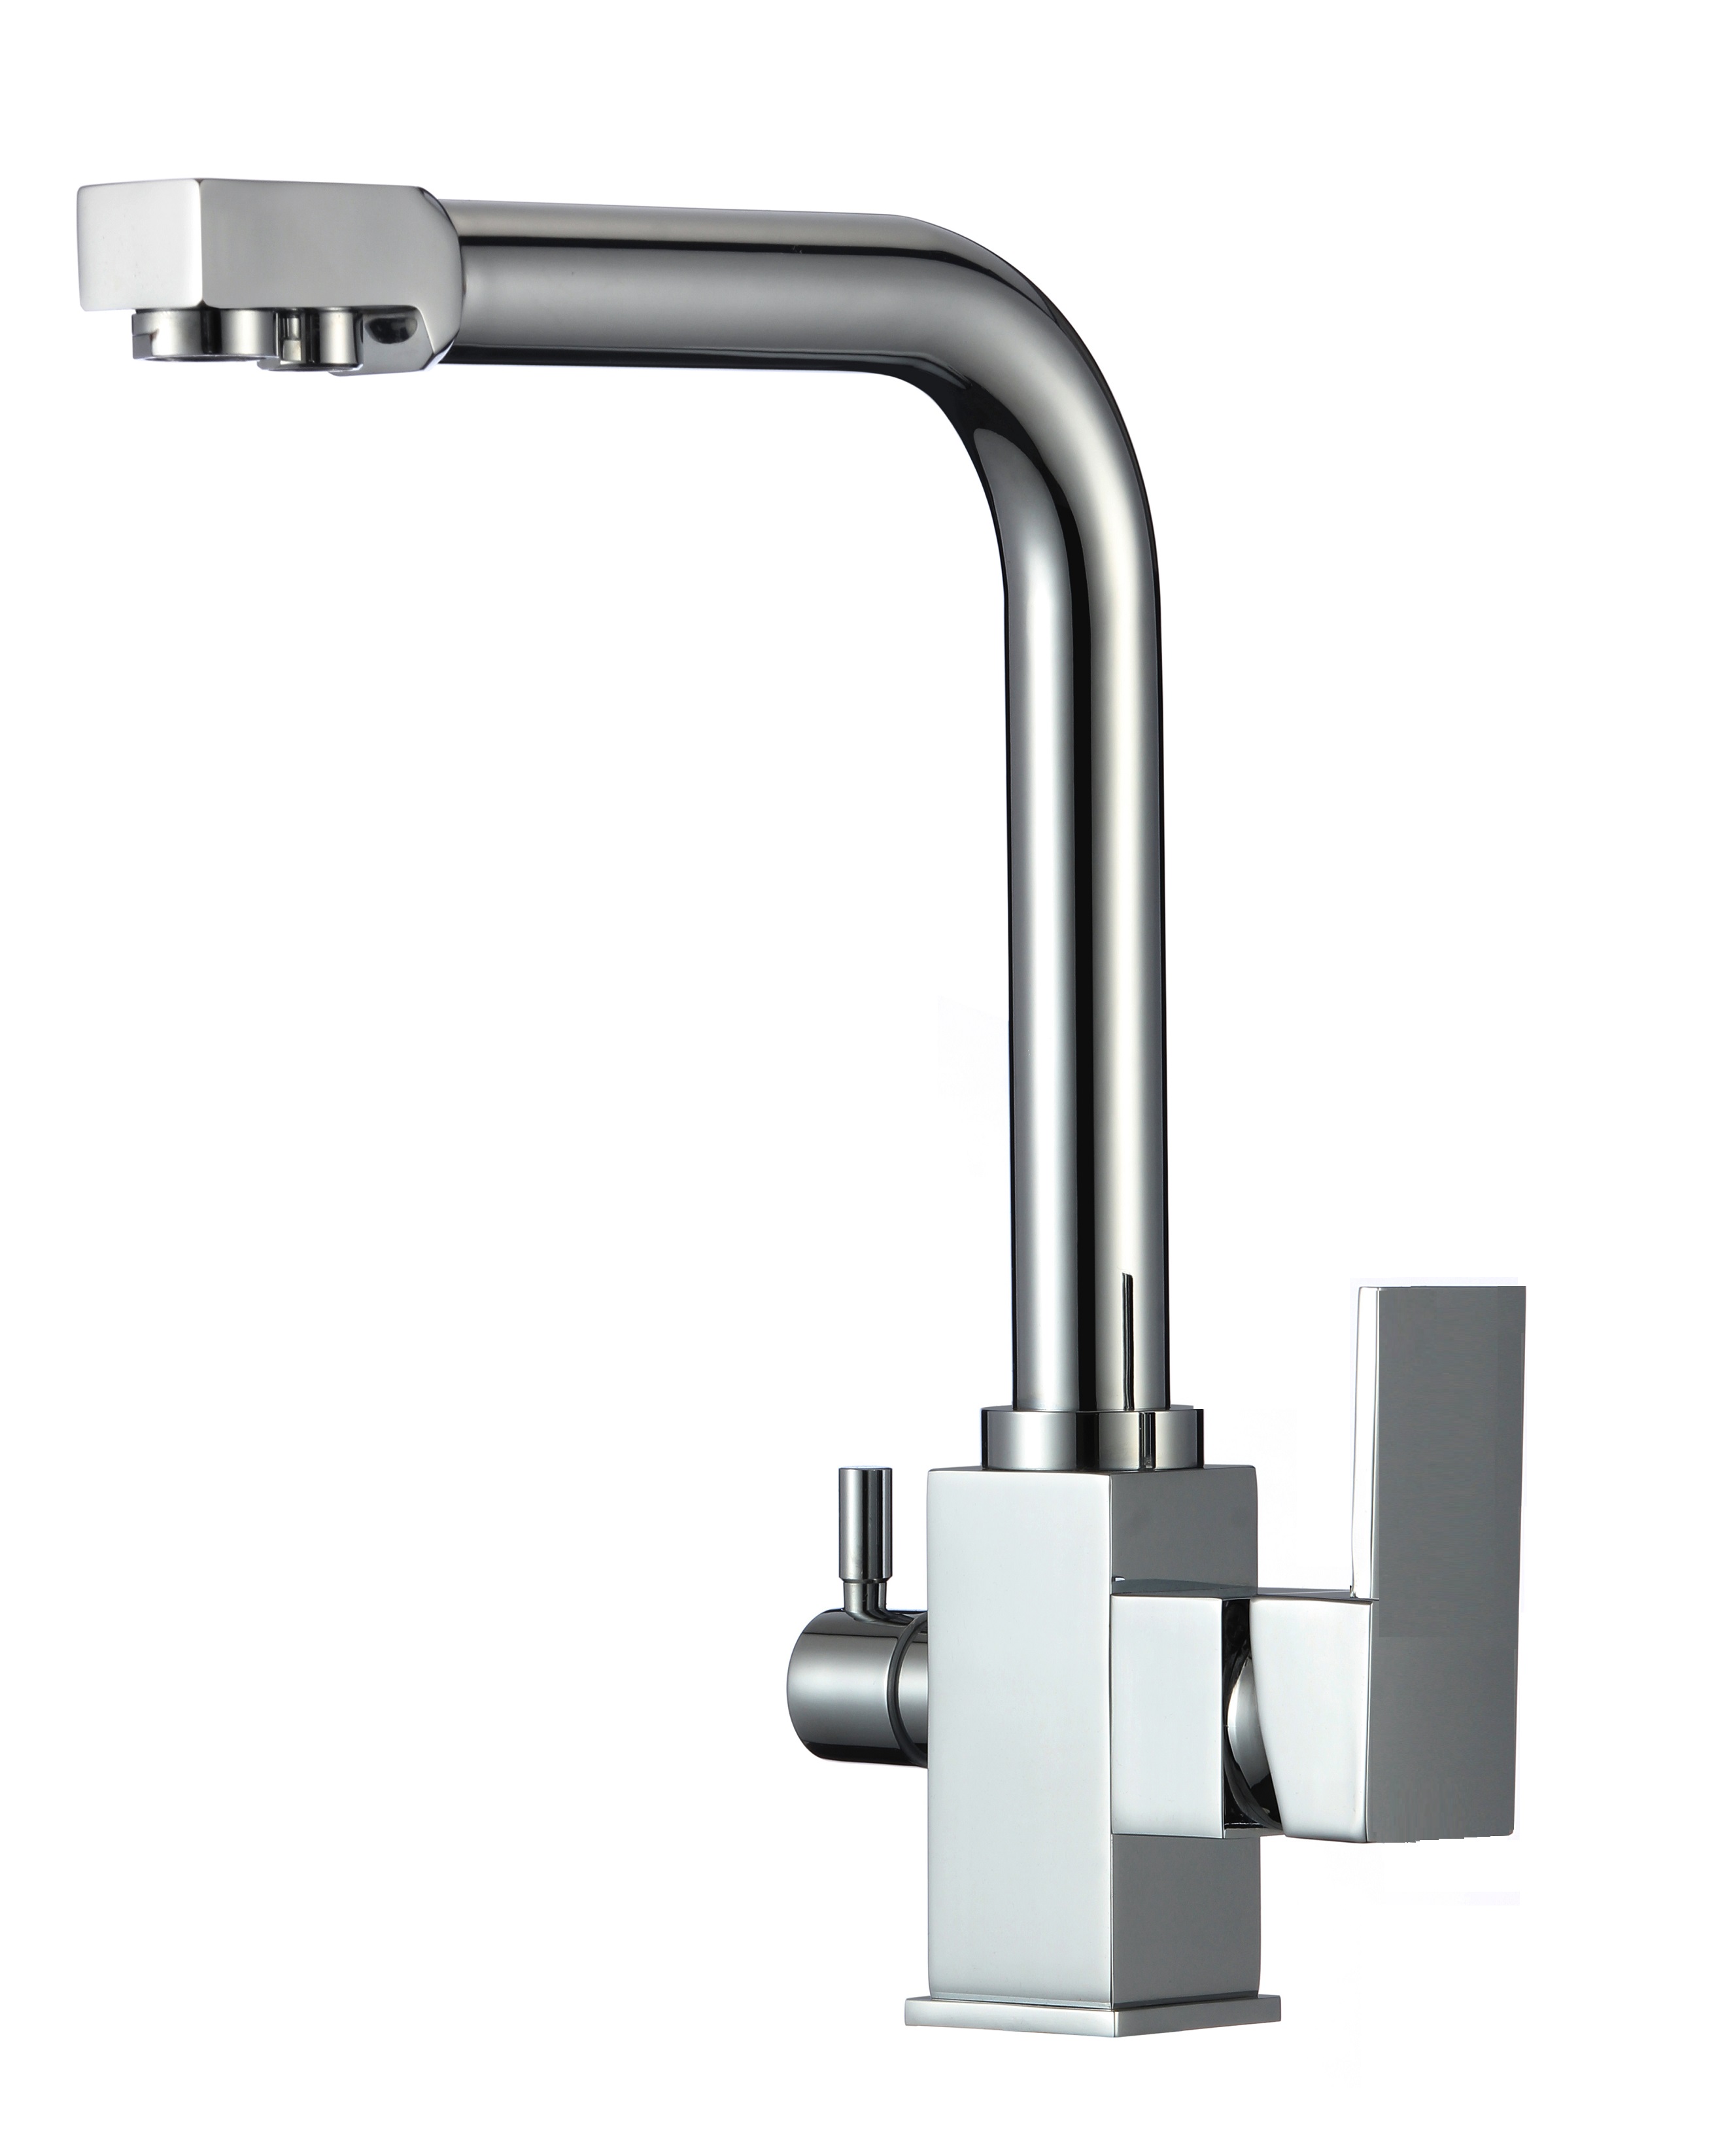 YL-701 Kitchen Faucets Brass Mixer Drinking Kitchen Purify Faucet Sink Tap Water Tap Crane For Kitchen